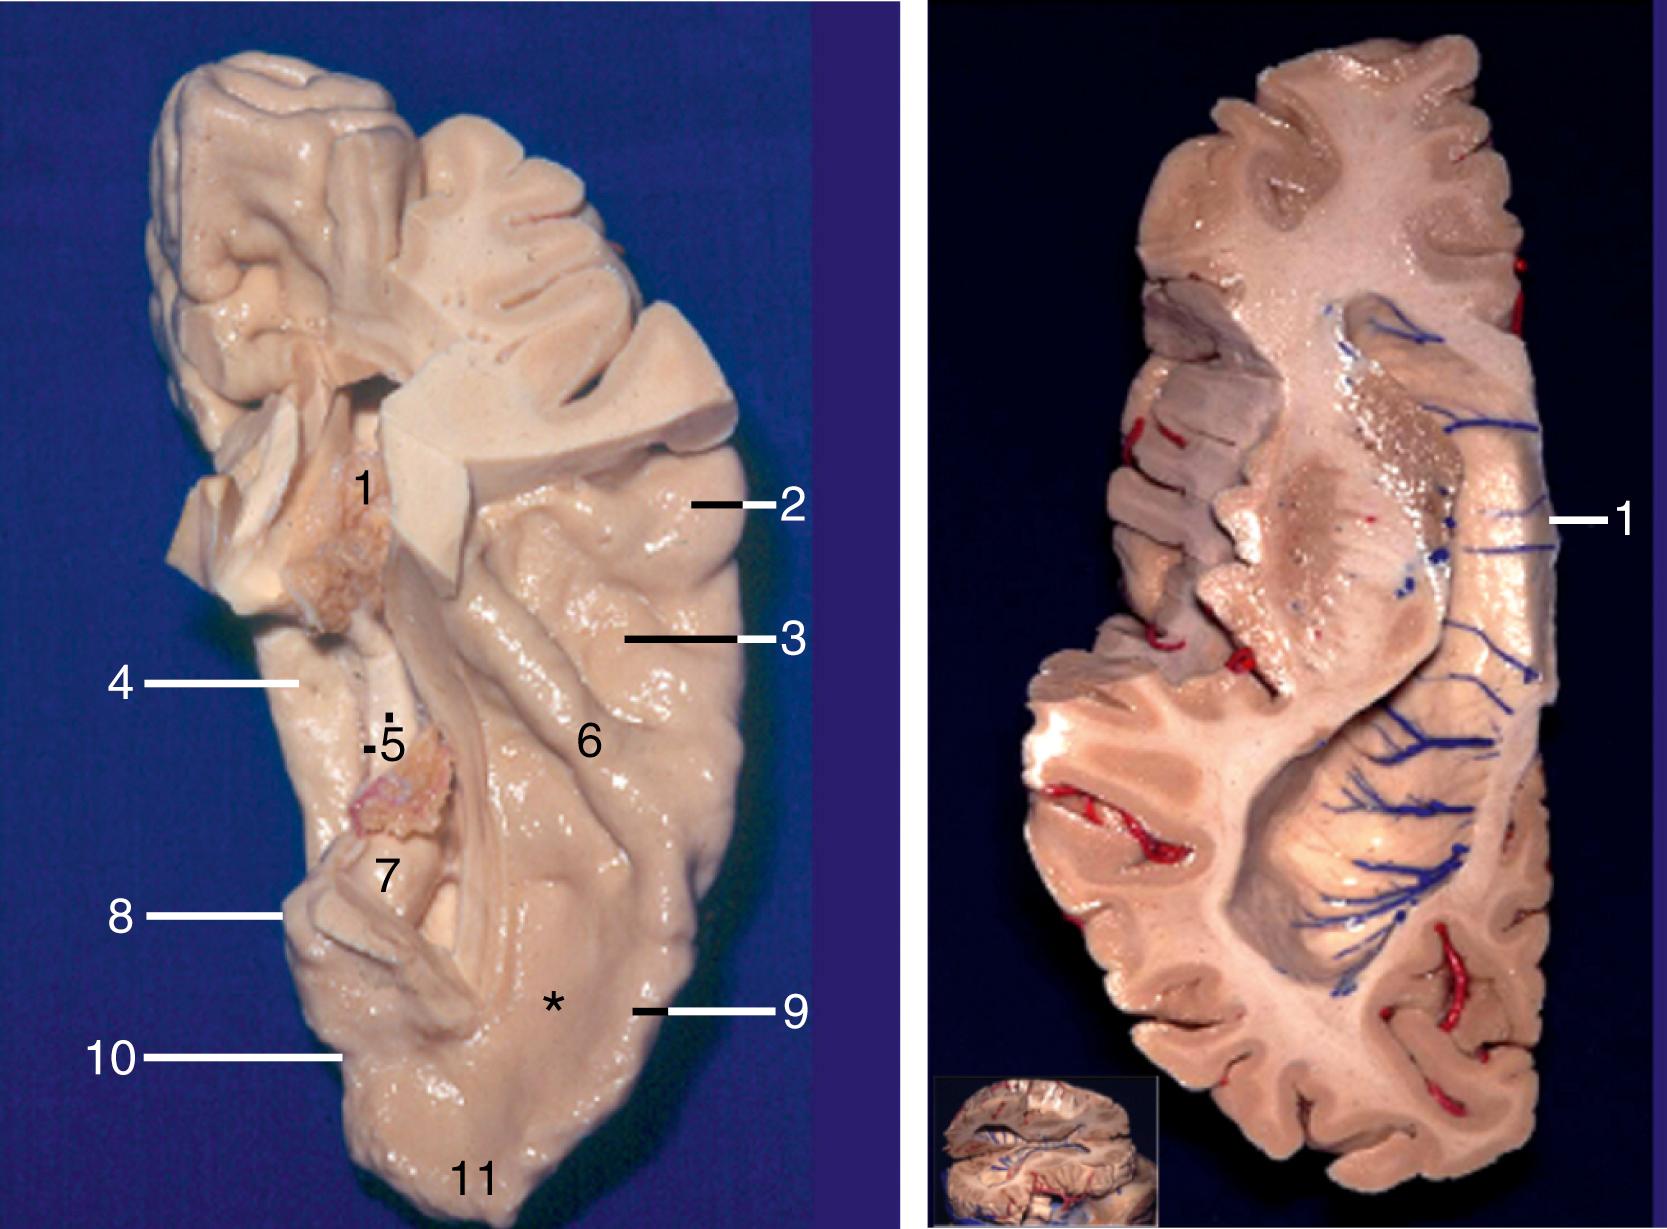 Figure 2.7, Left, Anterosuperior view of the left temporal lobe. 1, Atrium; 2, posterior transverse temporal gyrus; 3, middle transverse temporal gyrus; 4, parahippocampal gyrus; 5, fornix and dentate gyrus; 6, Heschl gyrus; 7, head of hippocampus; 8, uncus apex; 9, vertical portion of planum polare; 10, rhinal incisura; 11, horizontal portion of planum polare; ∗, floor of planum polare. The middle and posterior transverse temporal gyri form the planum temporale. Right, Basal view of roof of lateral ventricle. 1, Septum pellucidum. The veins of the roof of the lateral ventricle drain toward the midline. The inset demonstrates how the cut was made.